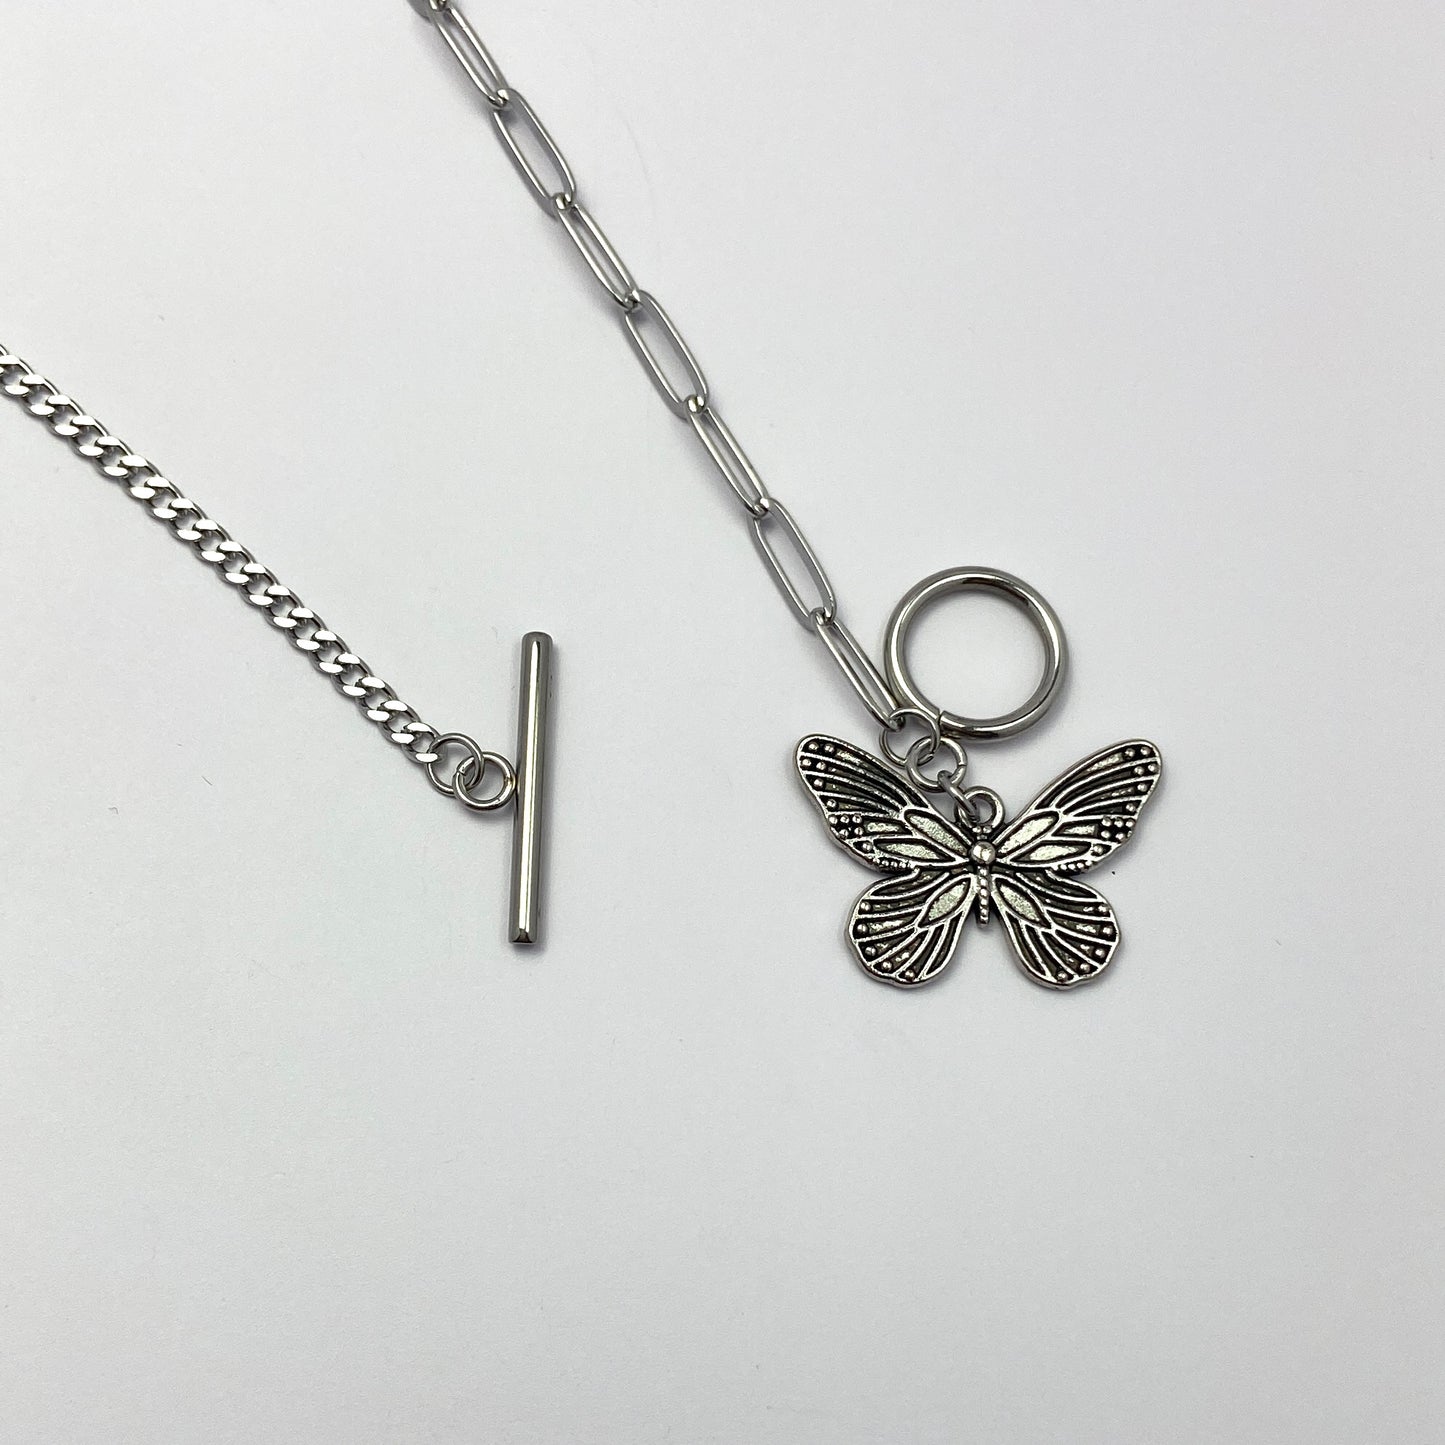 925 Silver Plated Butterfly Pendant Necklace for Men Women,Unisex Necklace